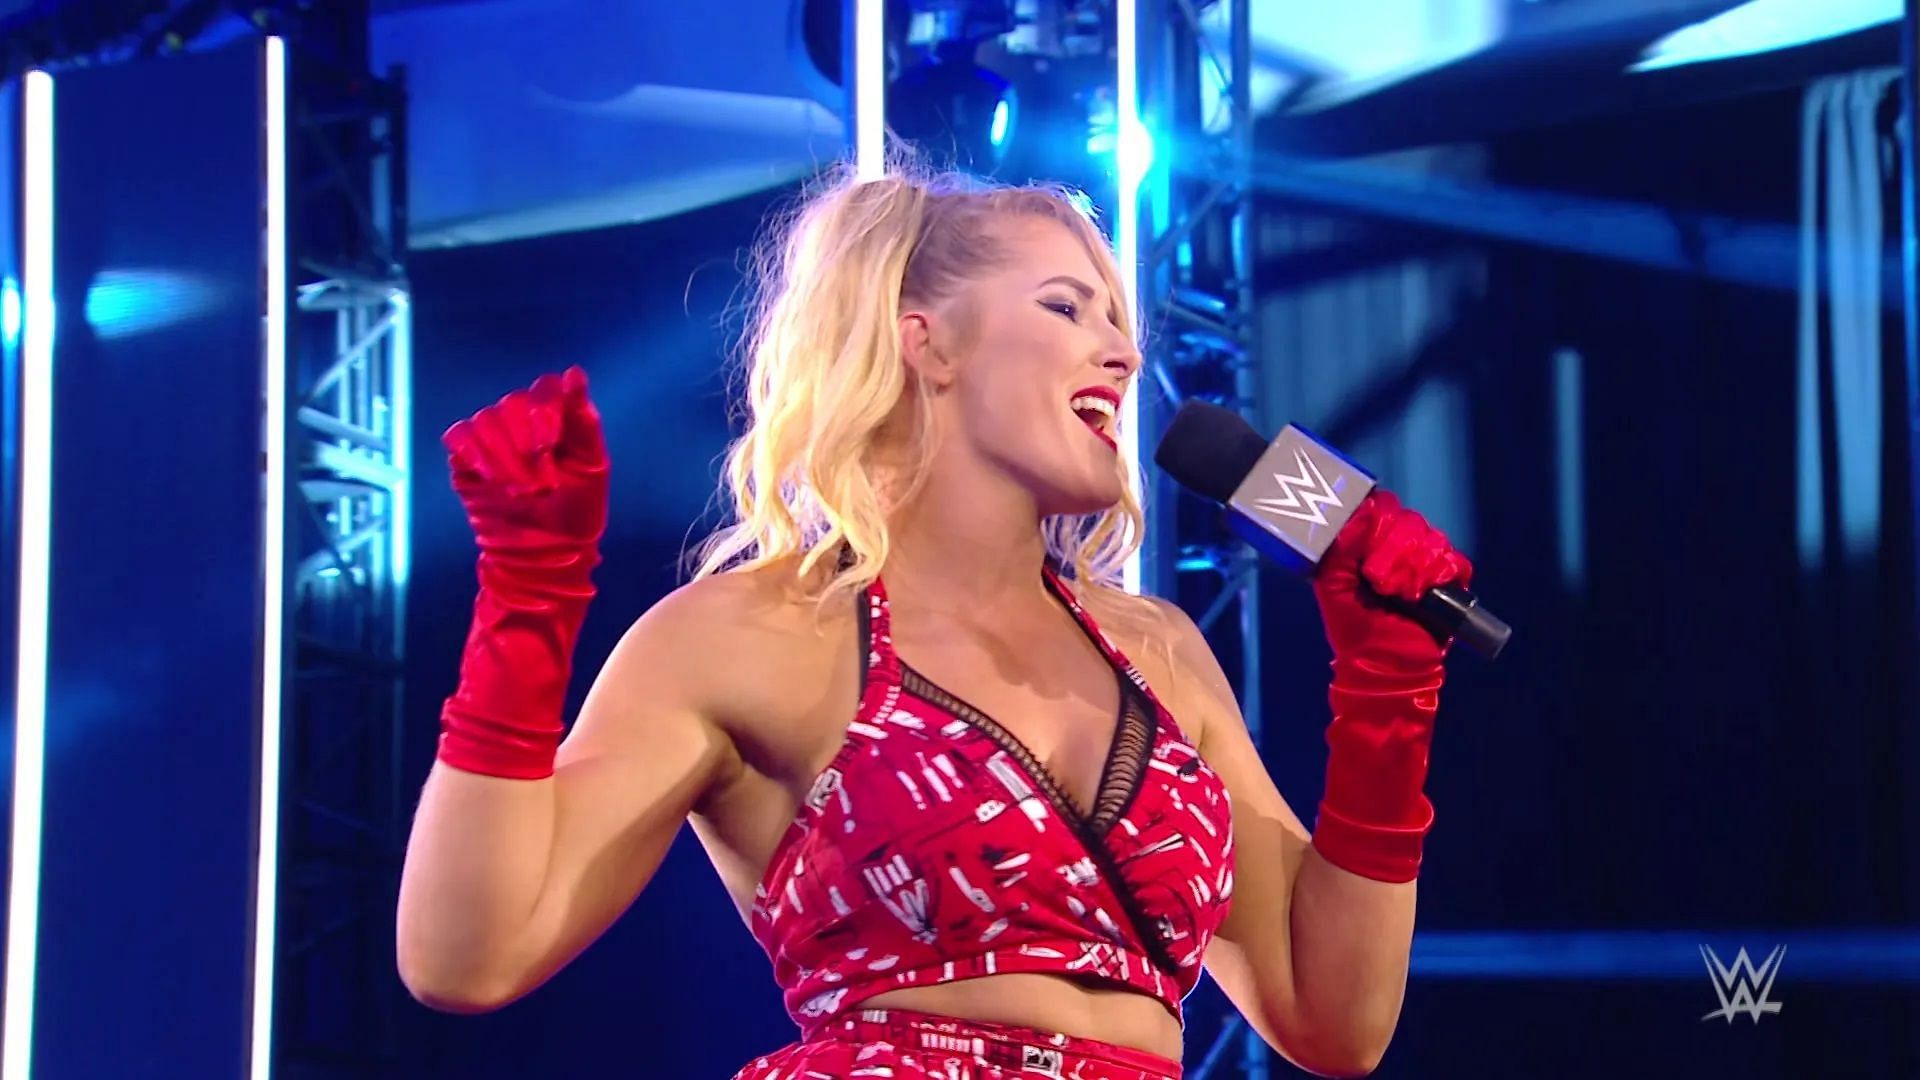 The returning Lacey Evans